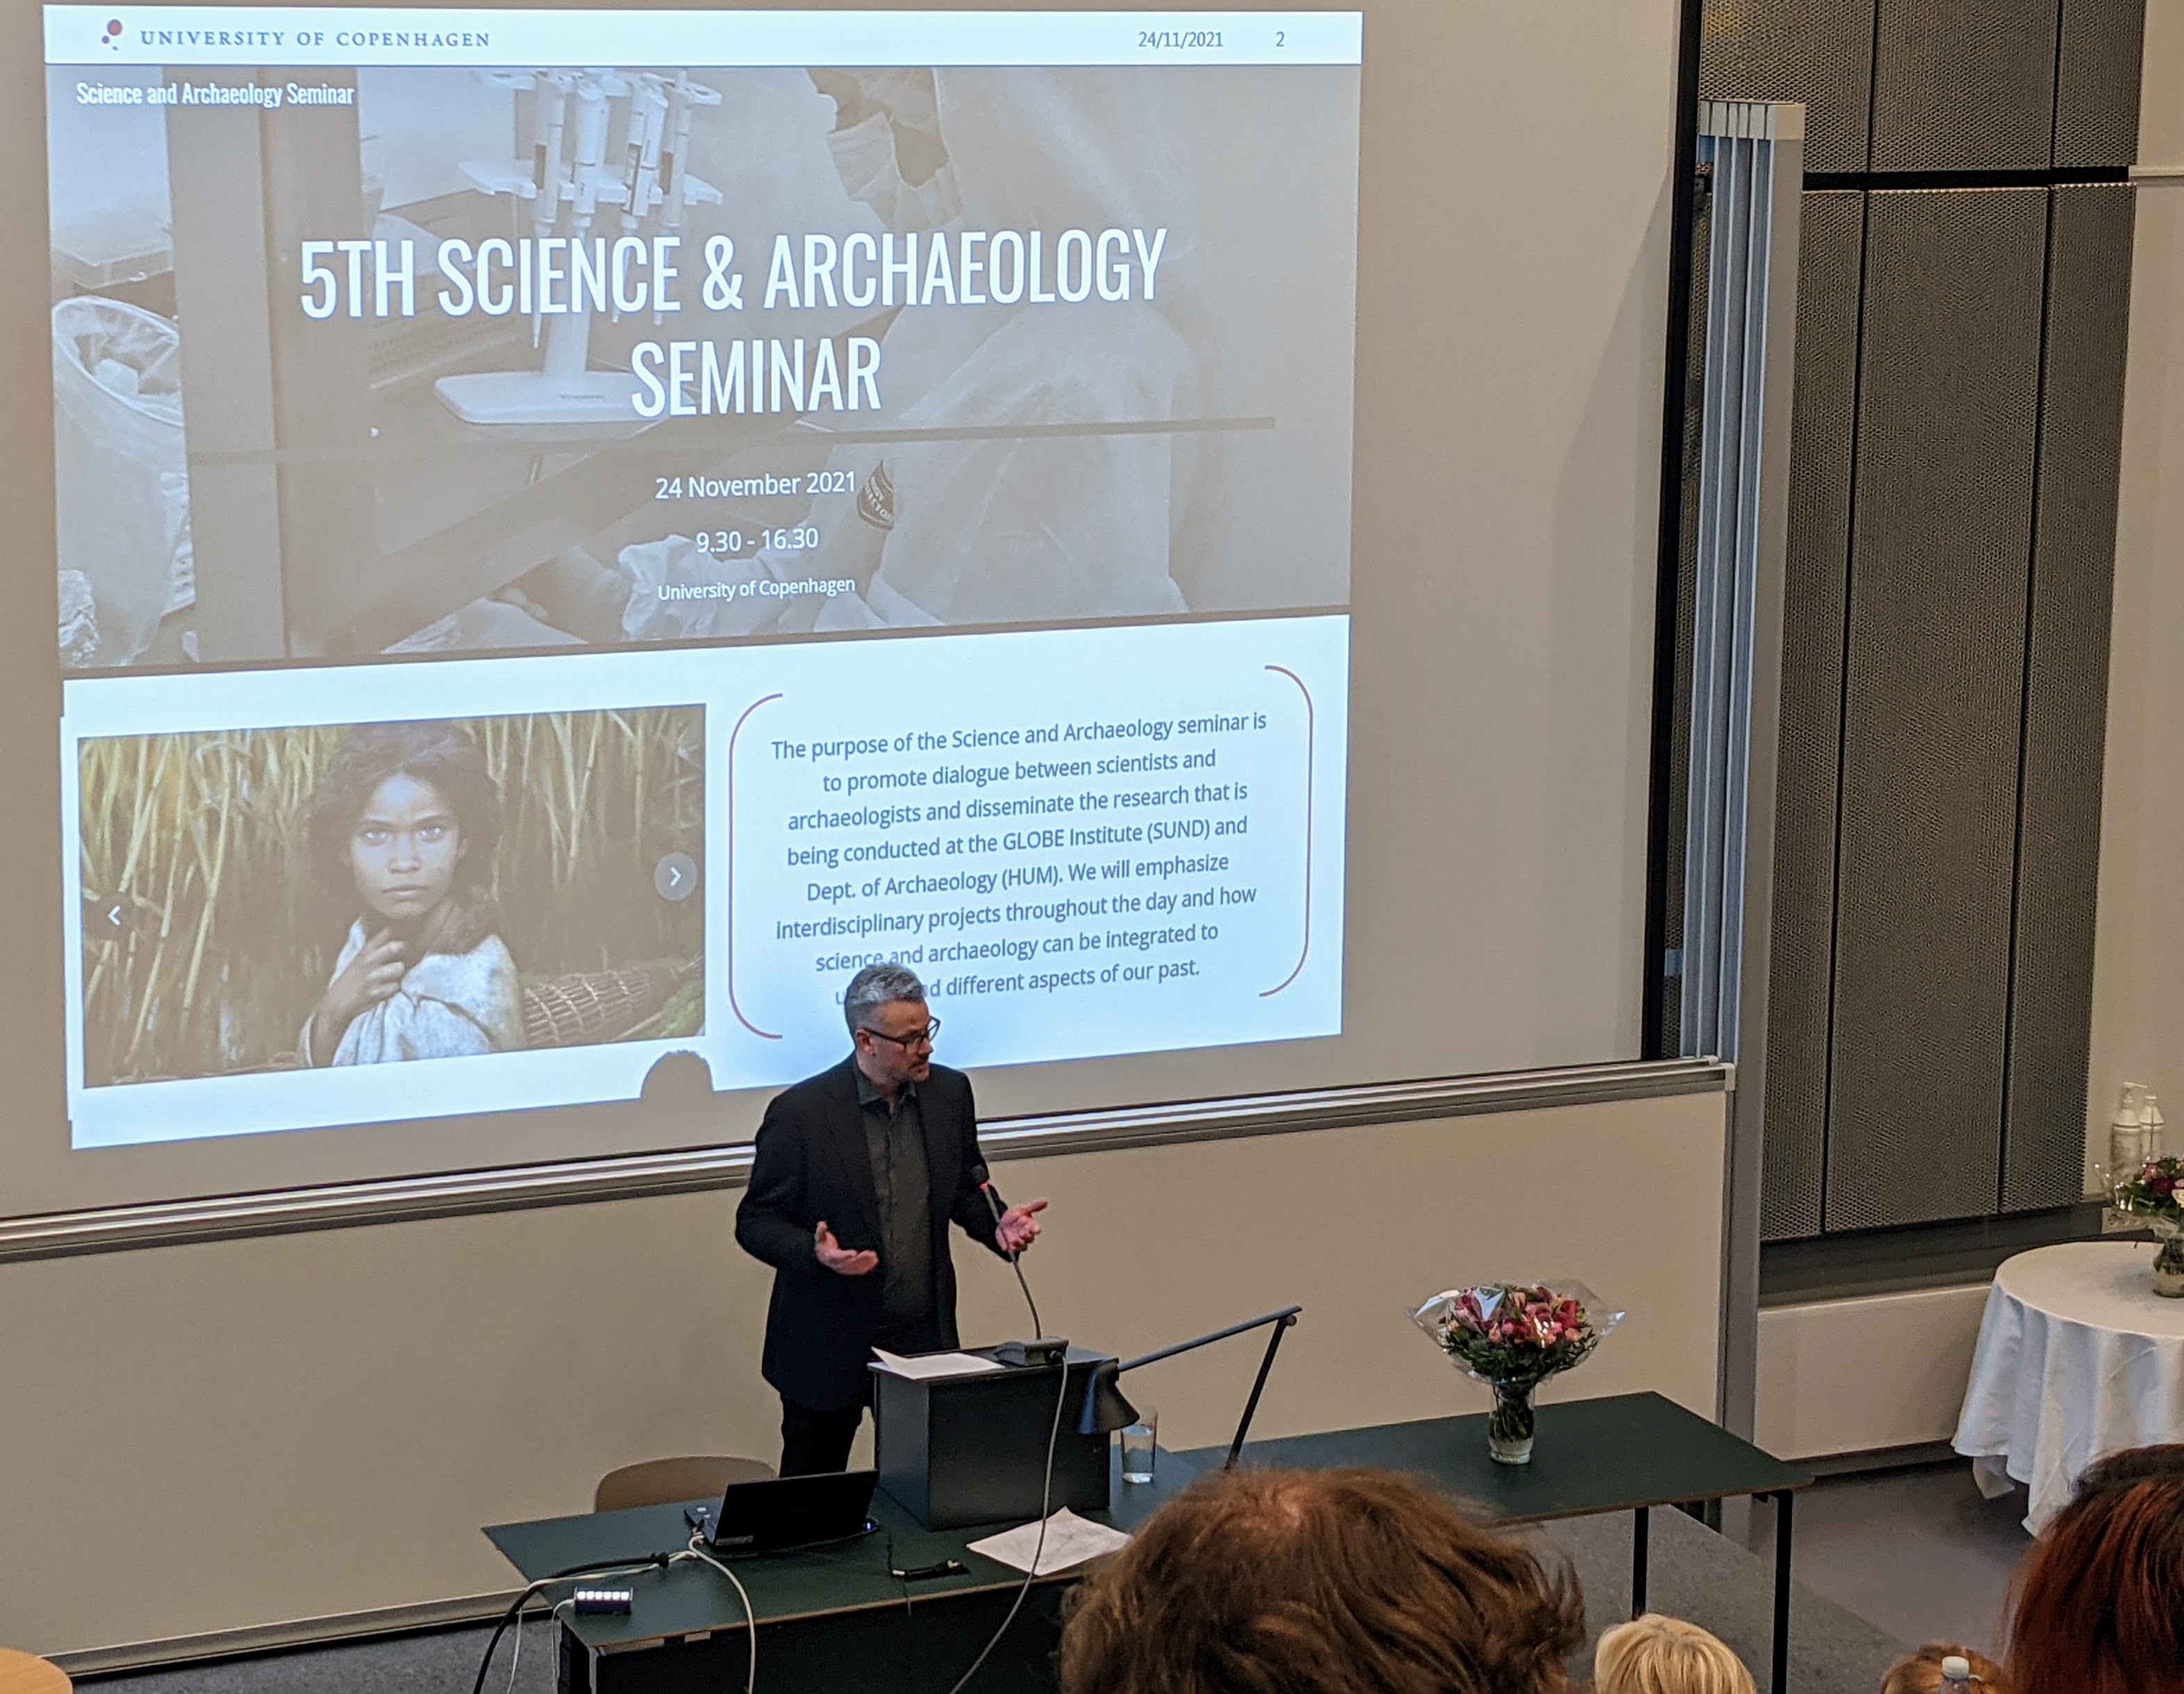 Palaeome on Twitter: "Tim Flohr Sørensen #UCPH #Saxo, asks "Is interdisciplinary is the new black?" Would a more dissonant disciplinary help #archaeological interpretation? / Twitter